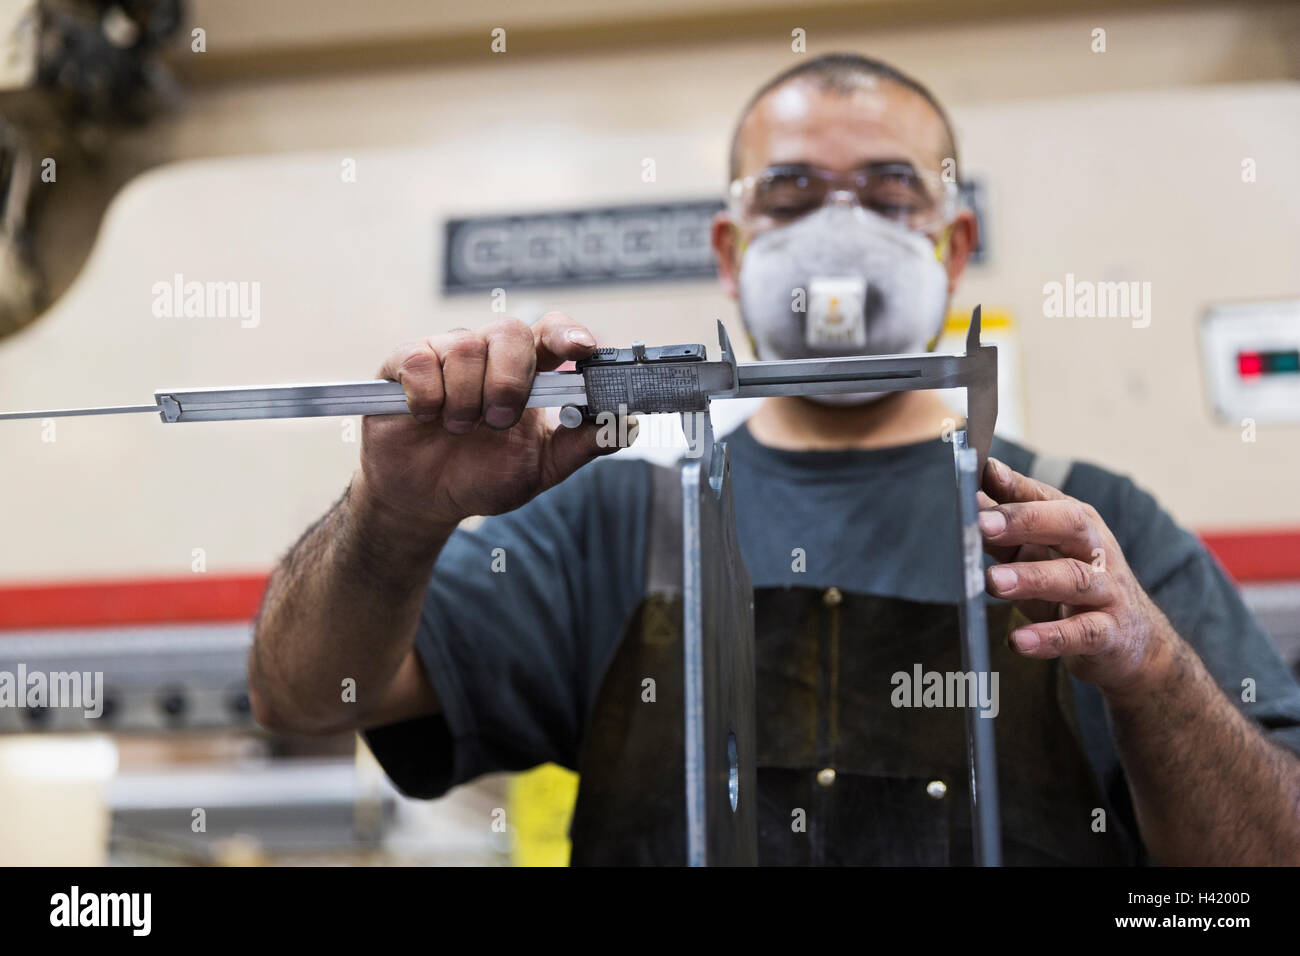 Hispanic worker measuring metal with caliper in factory Stock Photo